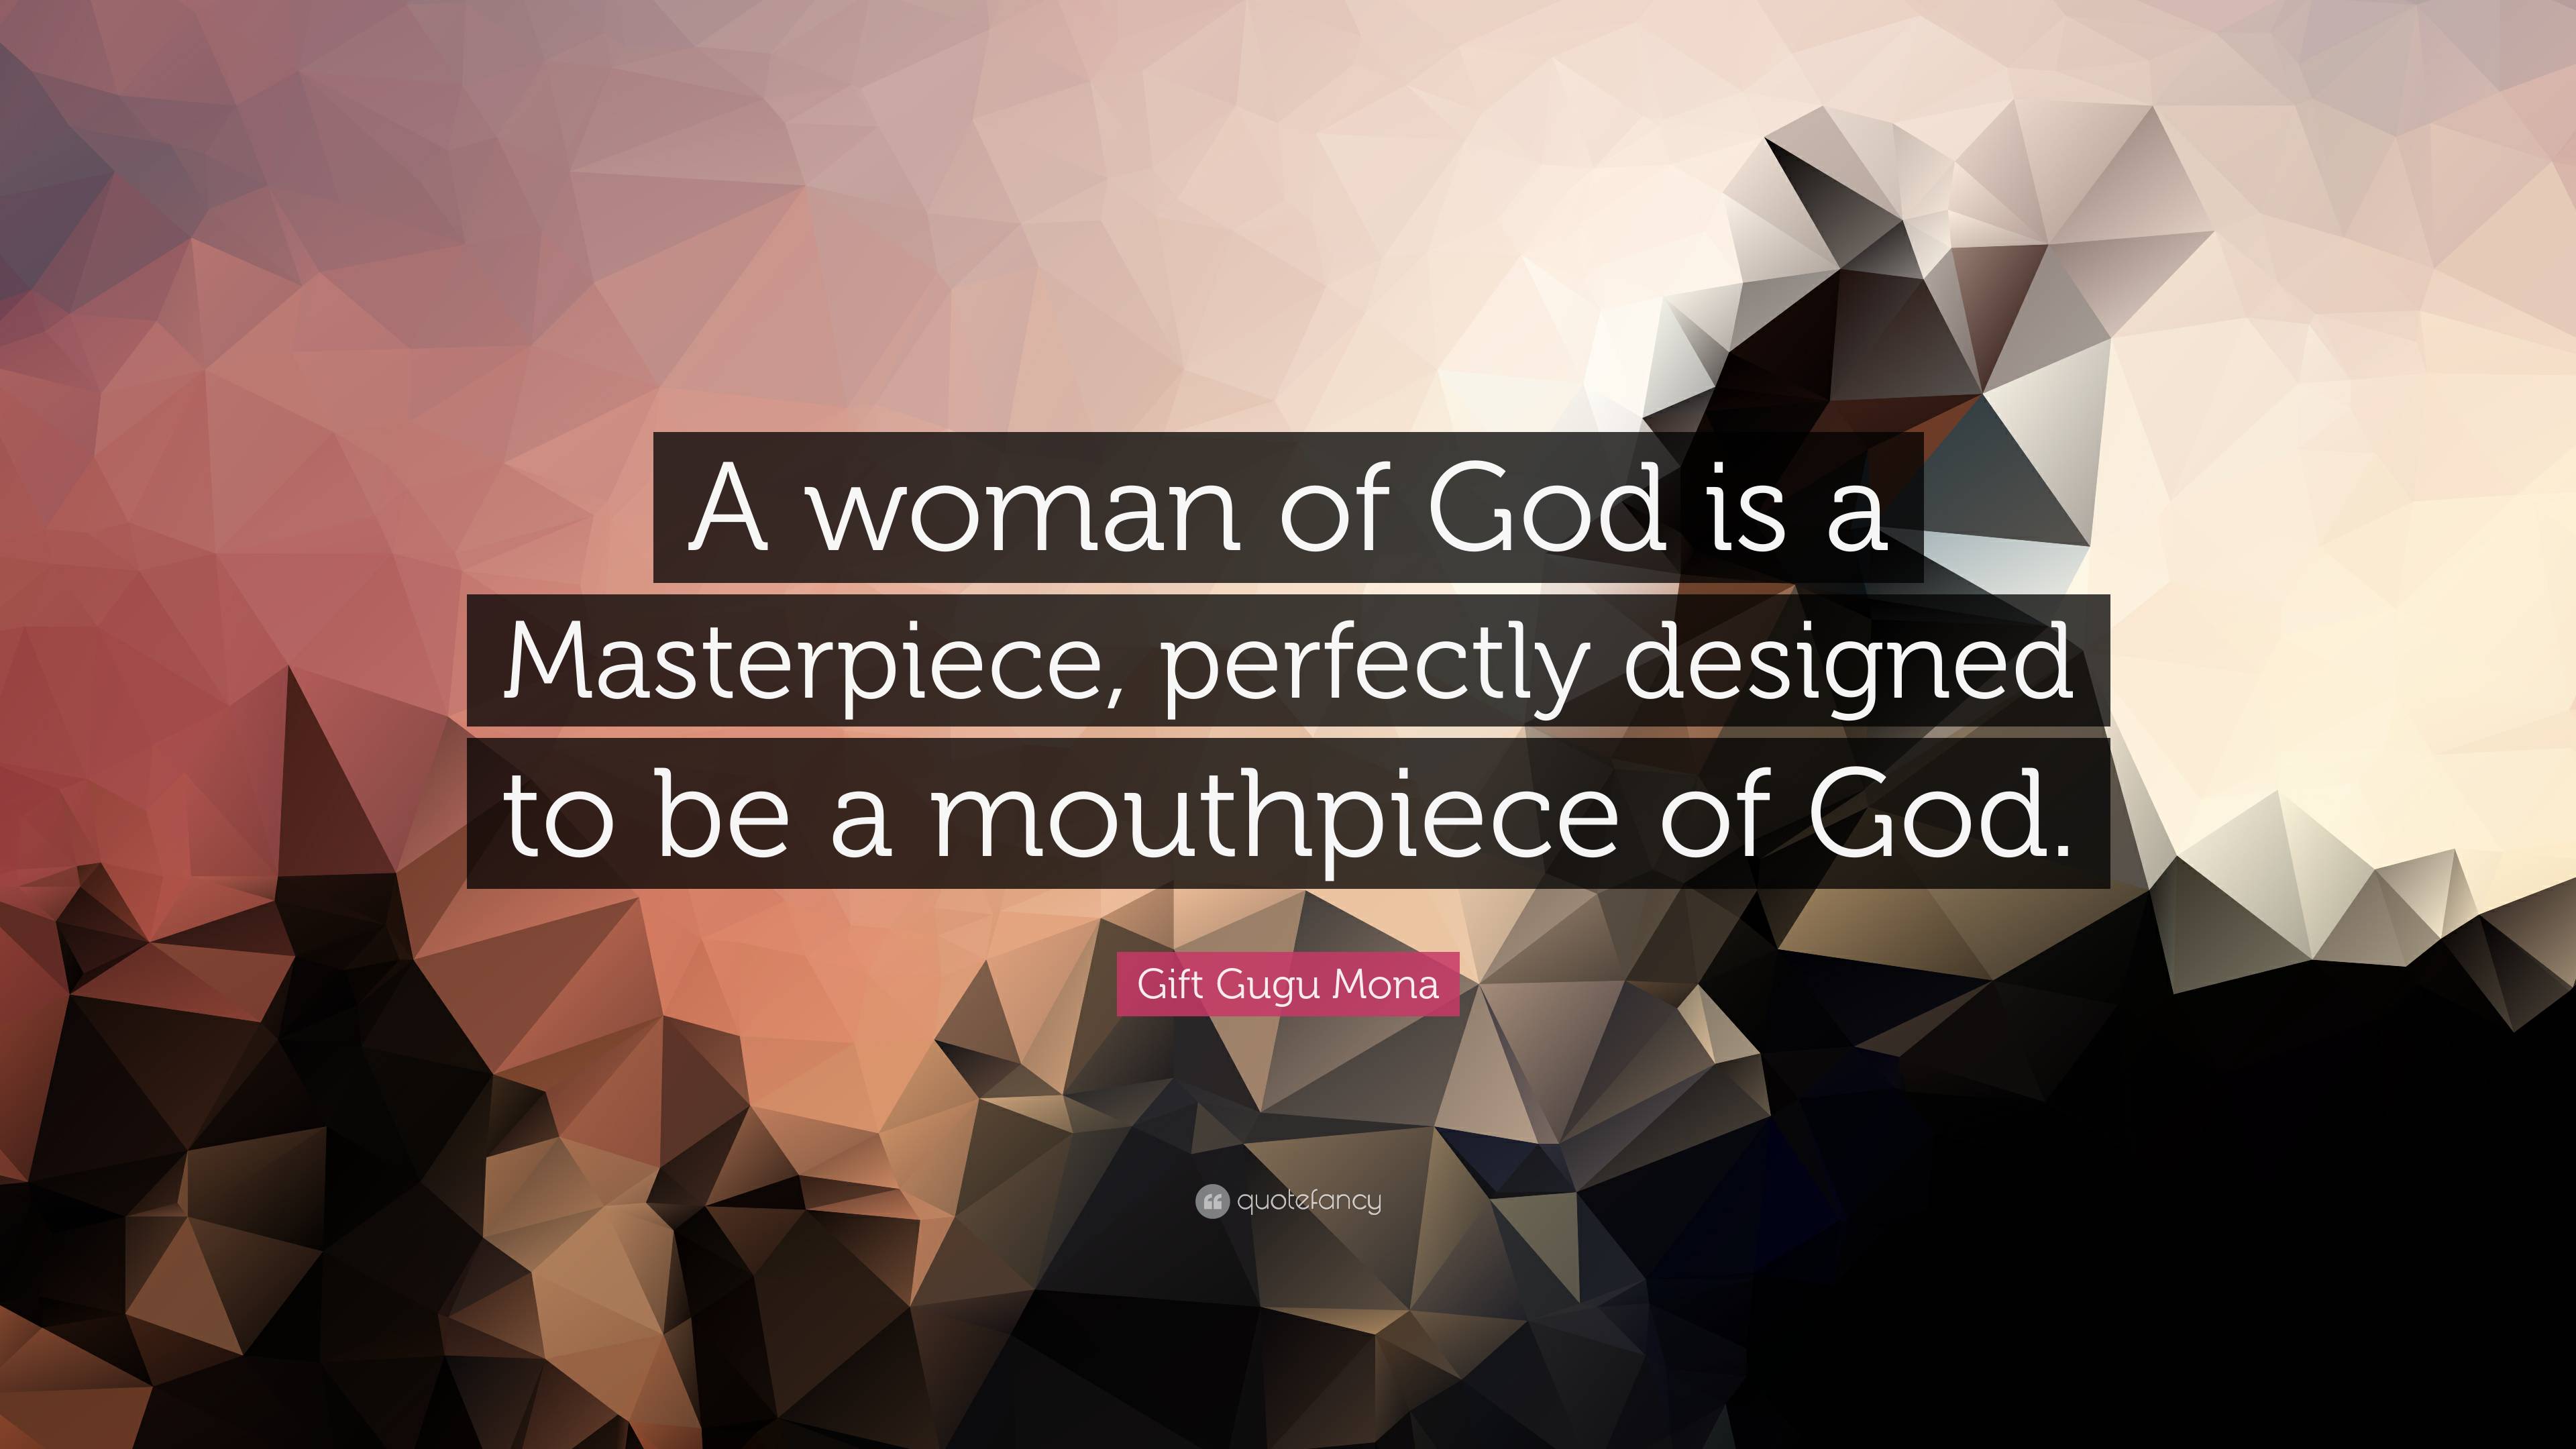 https://quotefancy.com/media/wallpaper/3840x2160/7546568-Gift-Gugu-Mona-Quote-A-woman-of-God-is-a-Masterpiece-perfectly.jpg